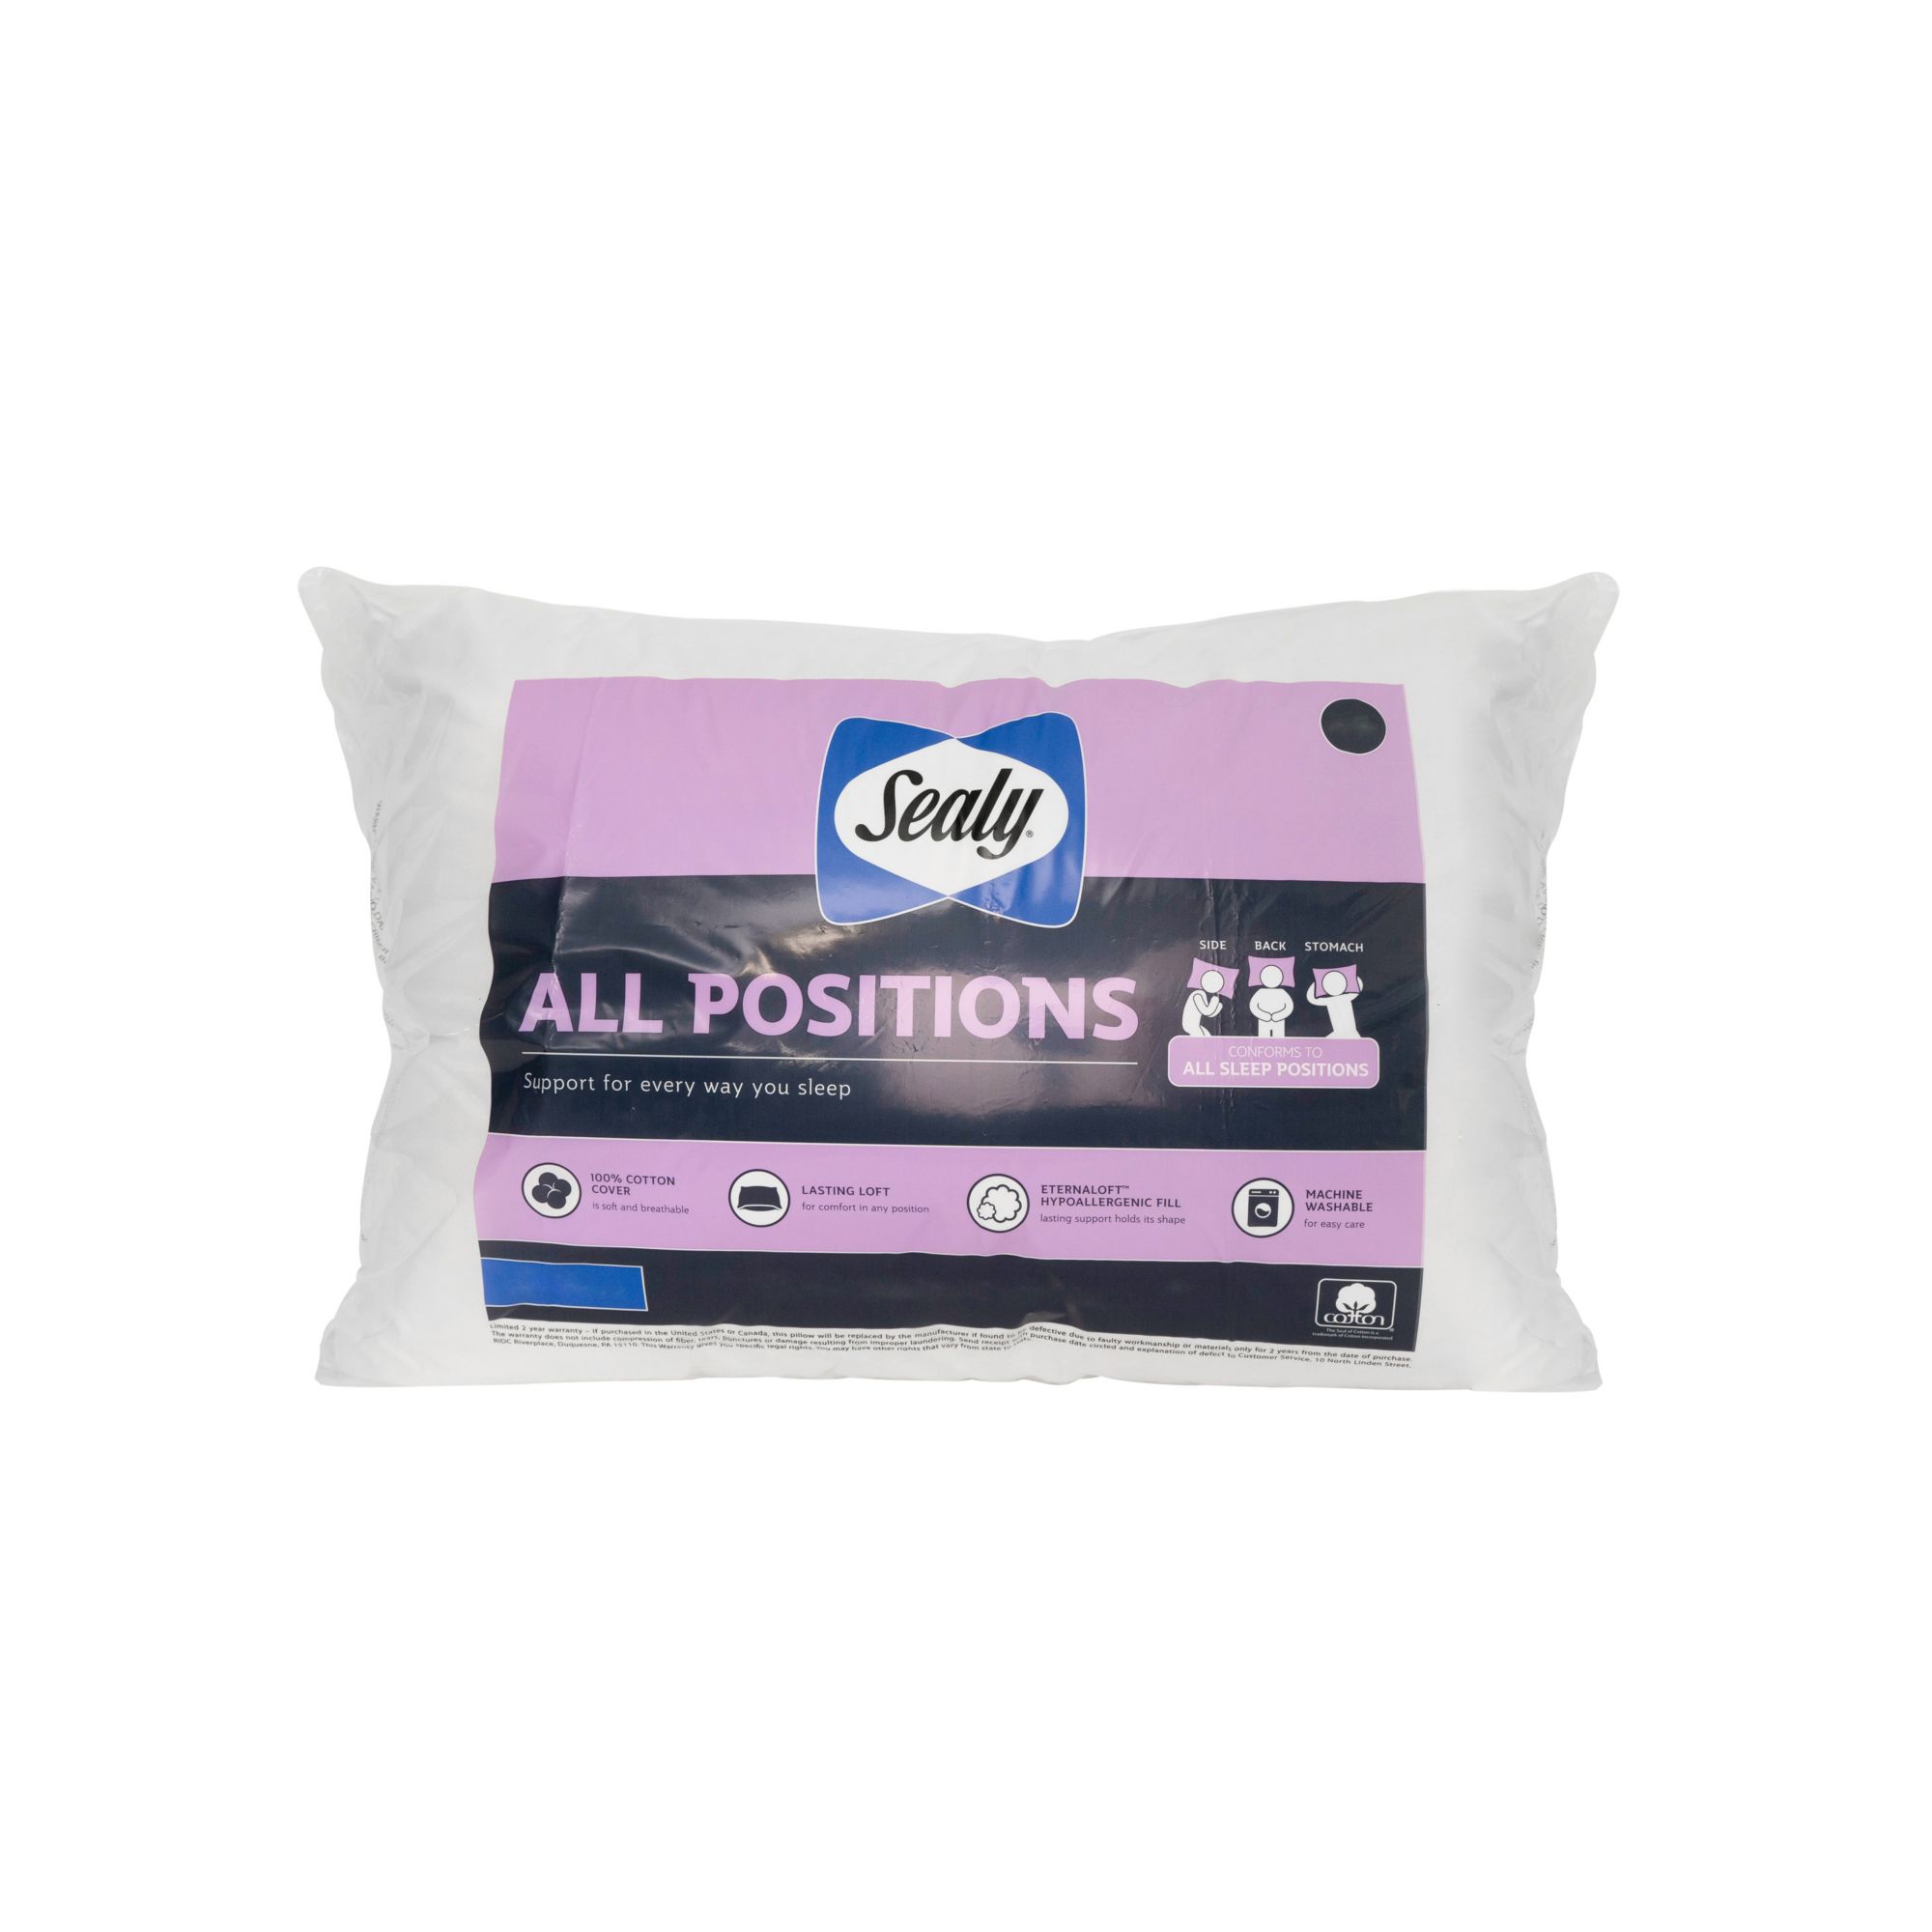 Sealy All Positions King Size Pillow